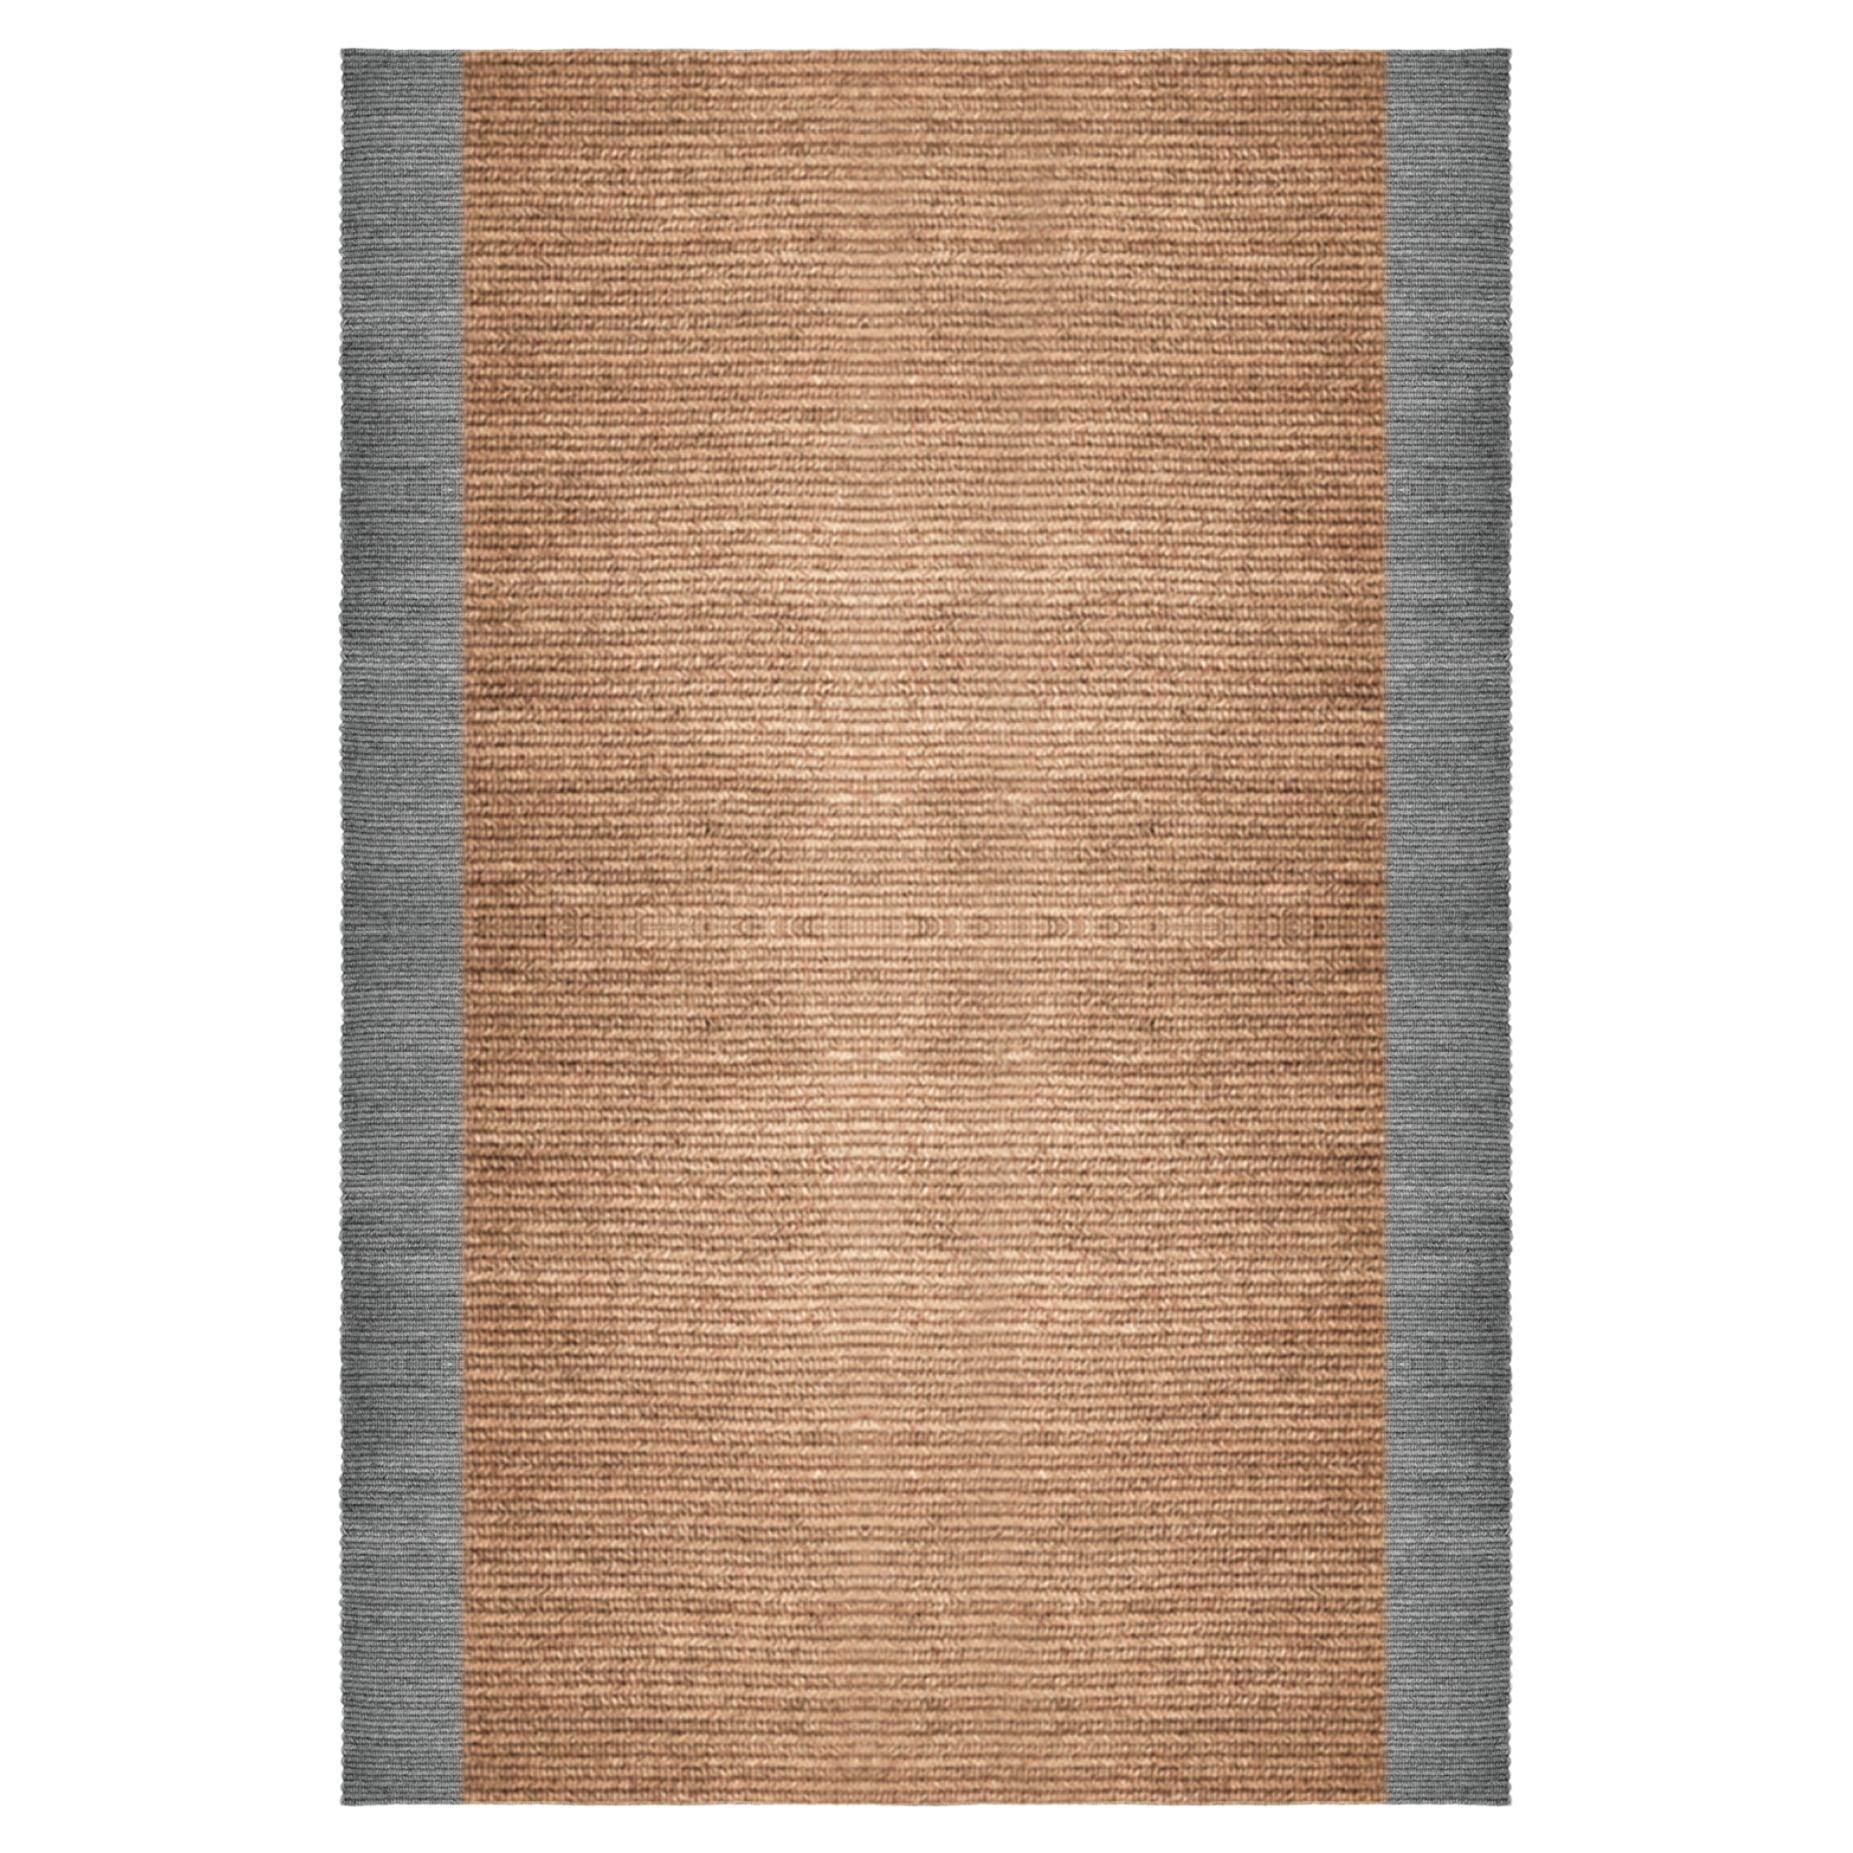 'Brim Duo' Rug in Abaca, by Claire Vos for Musett Design For Sale